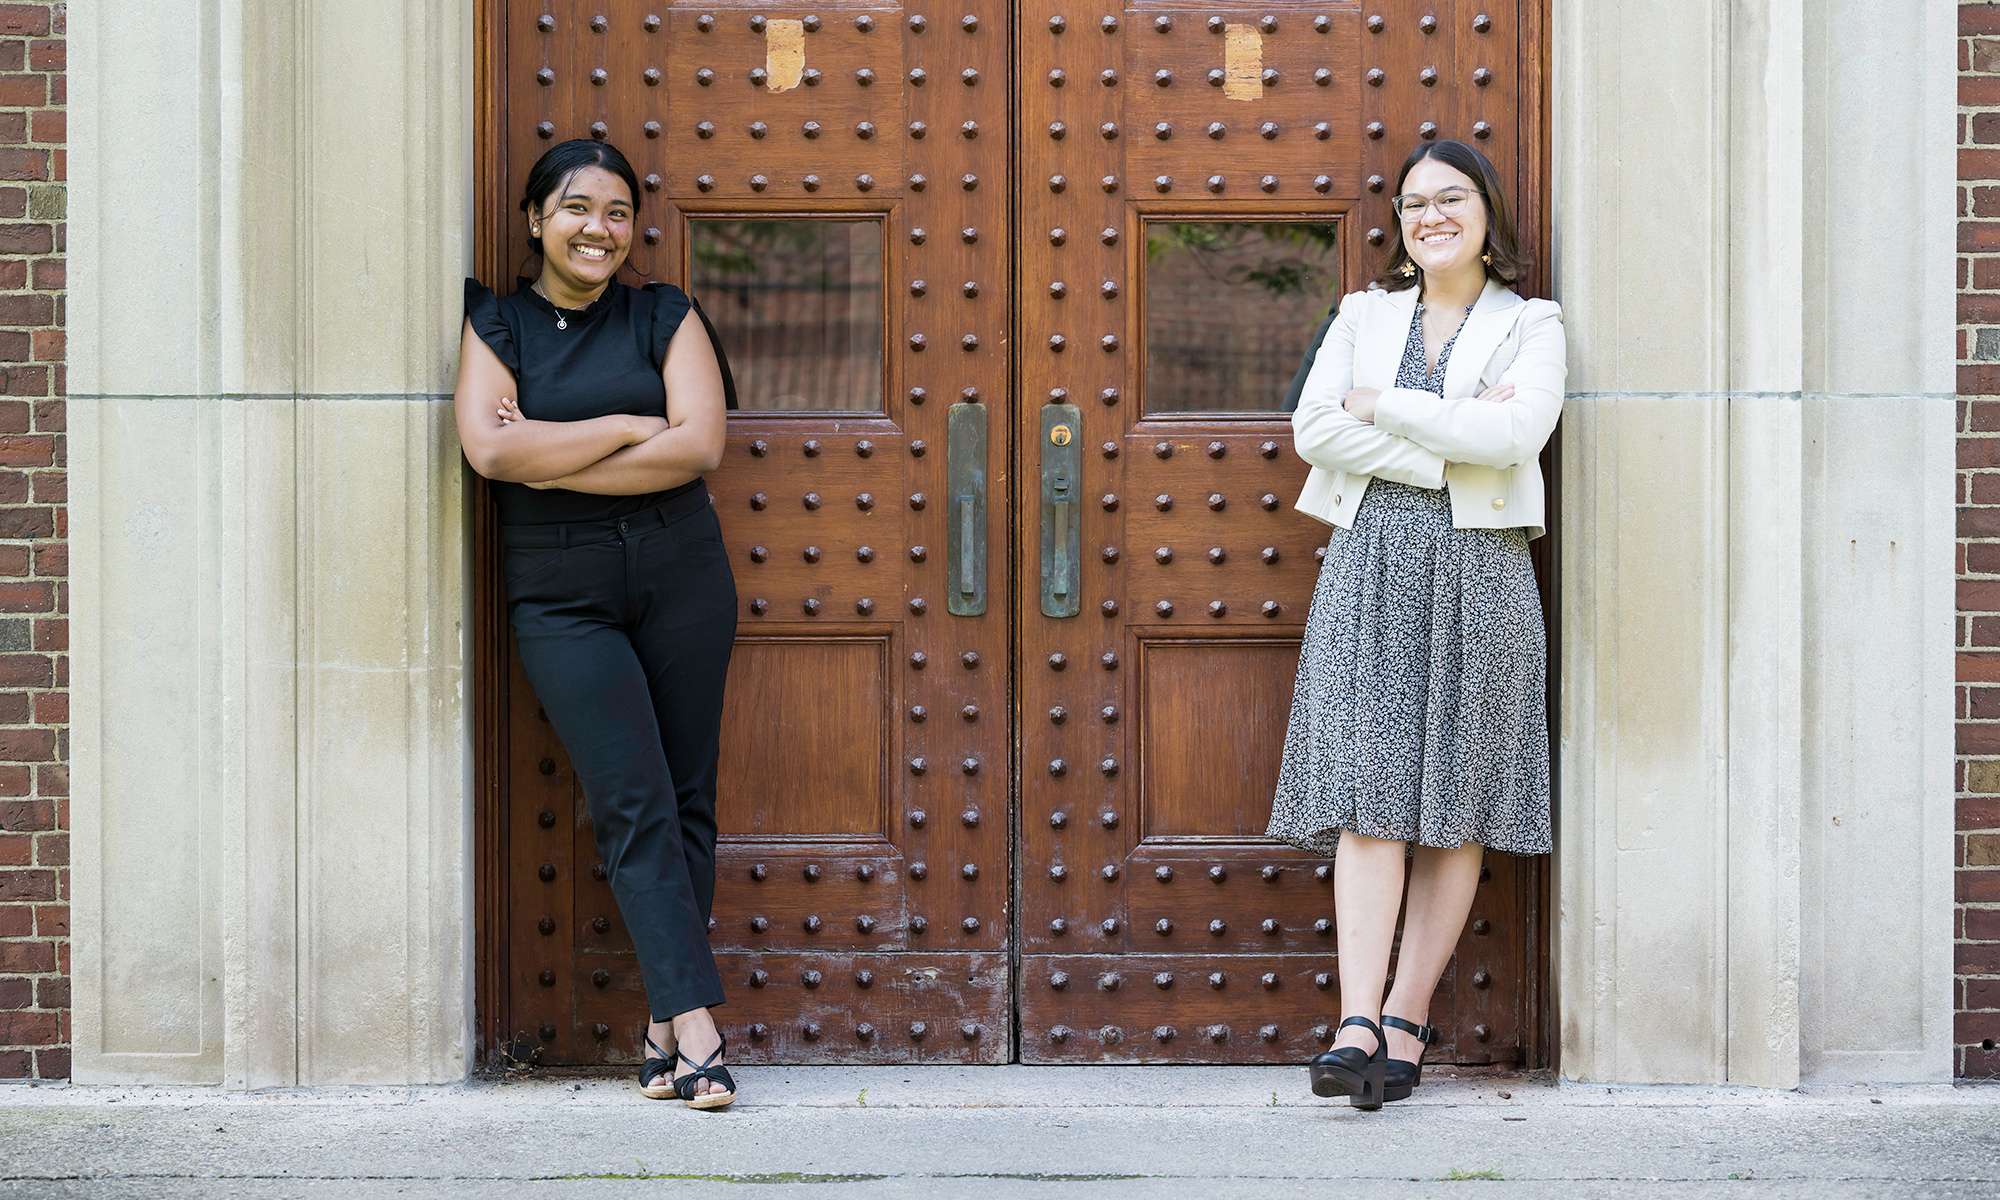 Mara Criollo-Rivera and Kristel Kezia Sagabaen Layugan smile as they pose for a photo leaning against the doors of Rush Rhees Library.